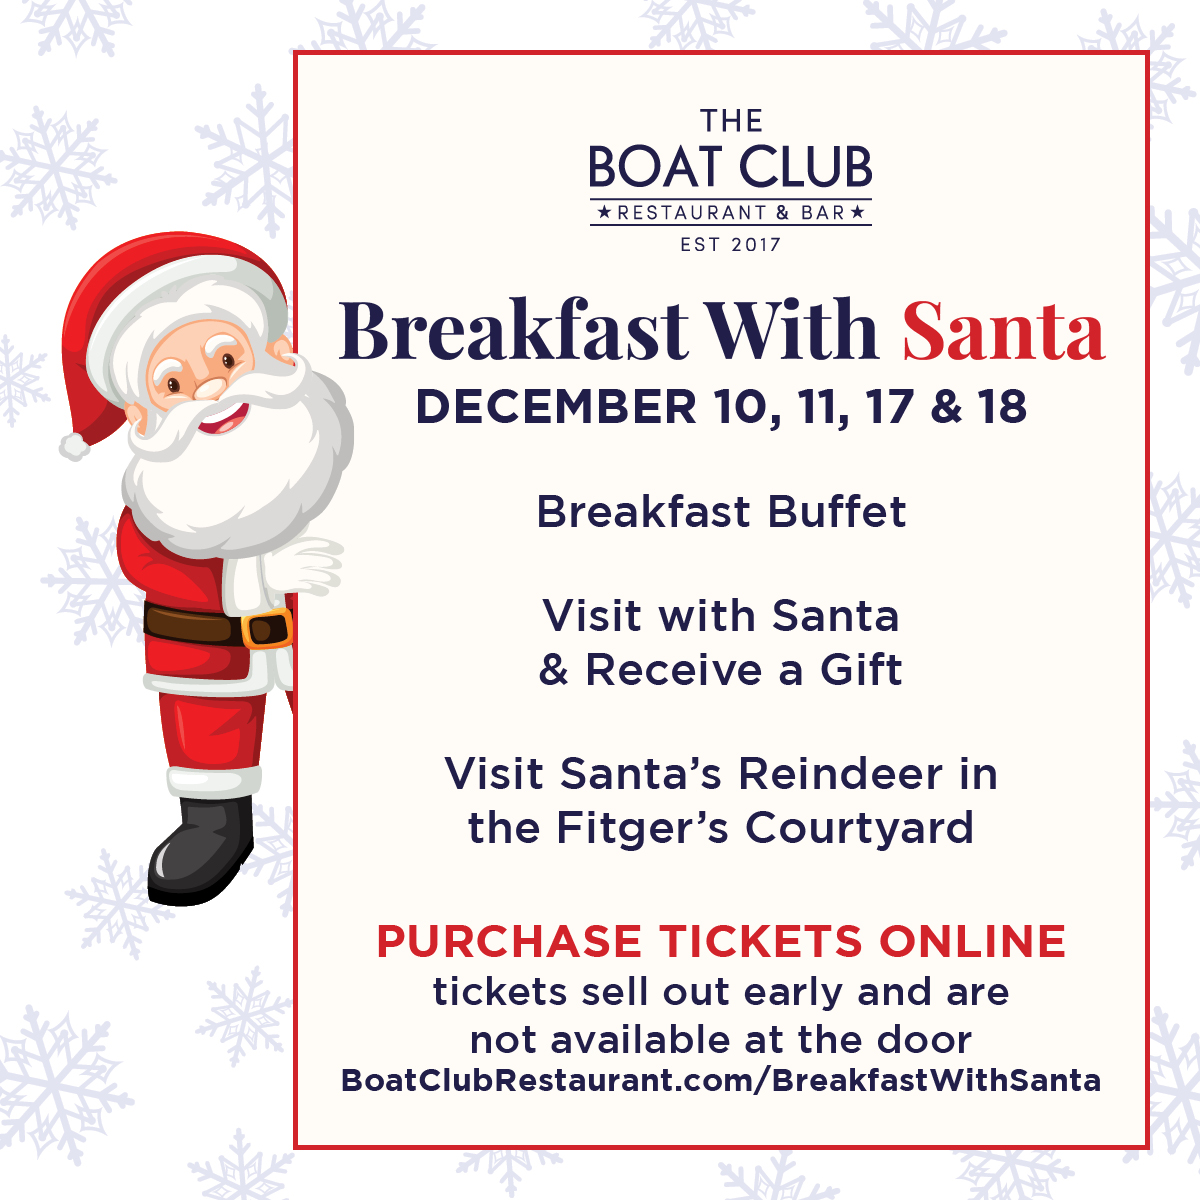 Breakfast with Santa at The Boat Club Restaurant